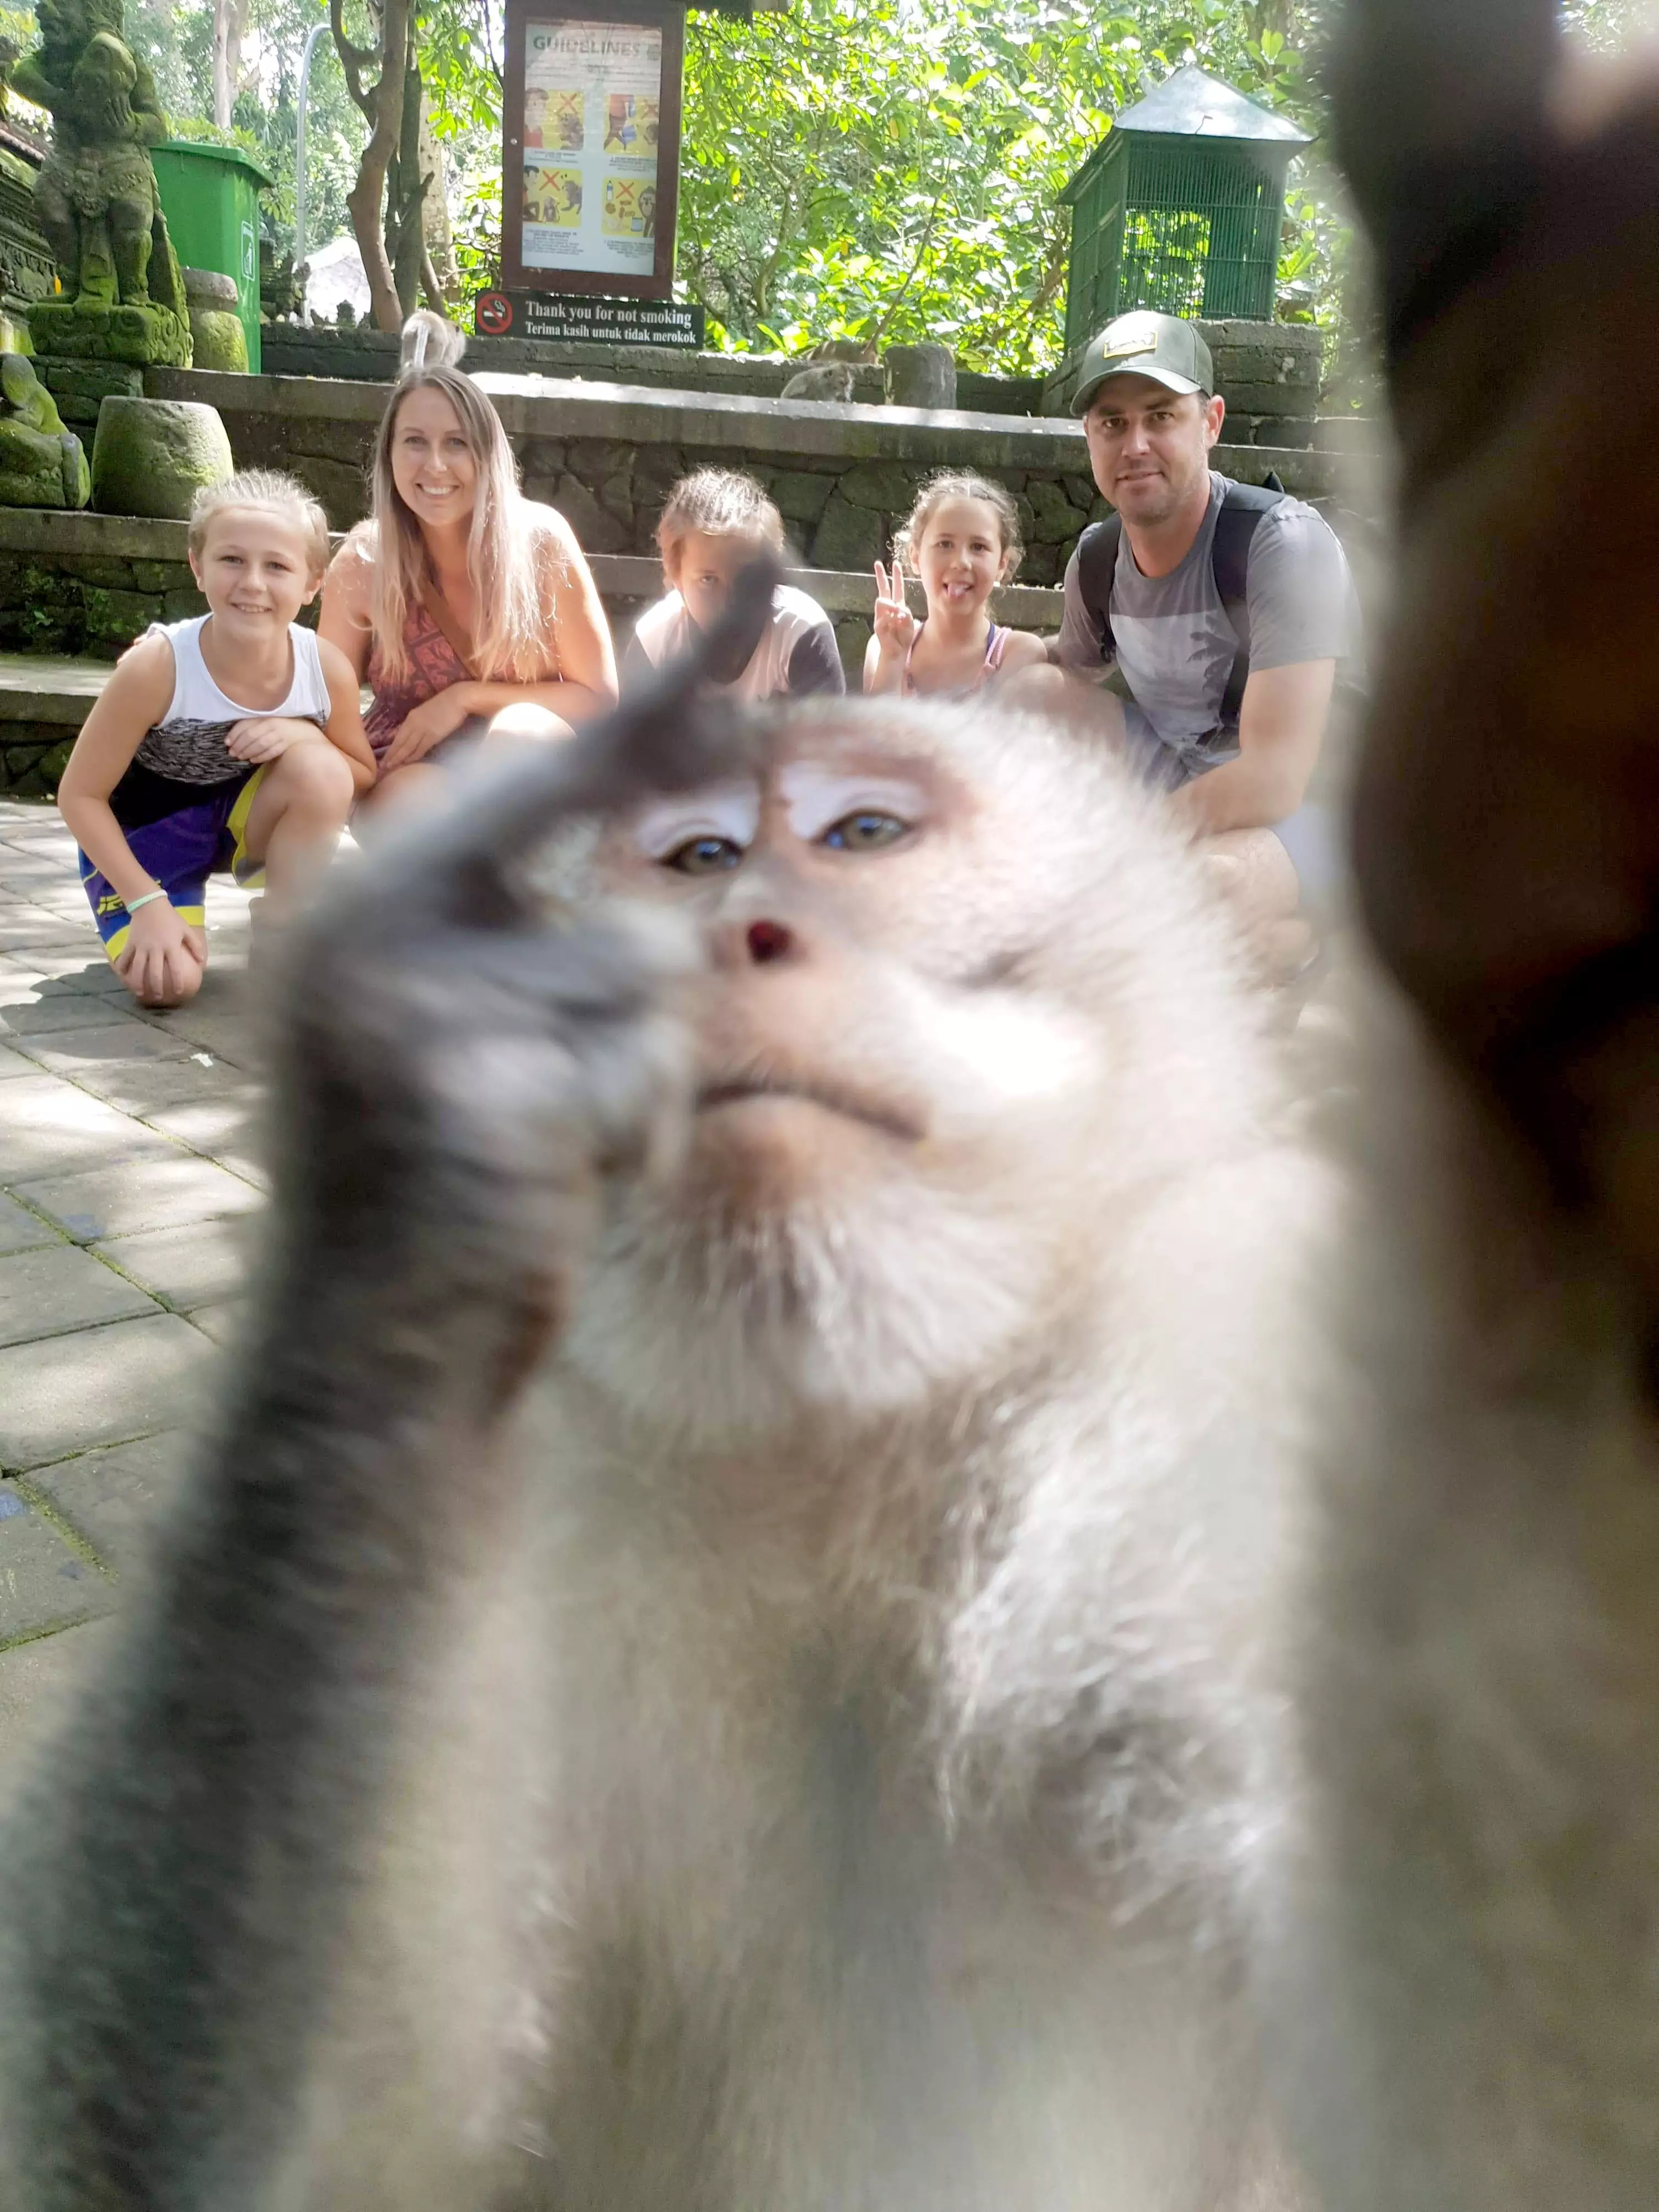 Nothing says taking the piss quite like a monkey giving you the finger.